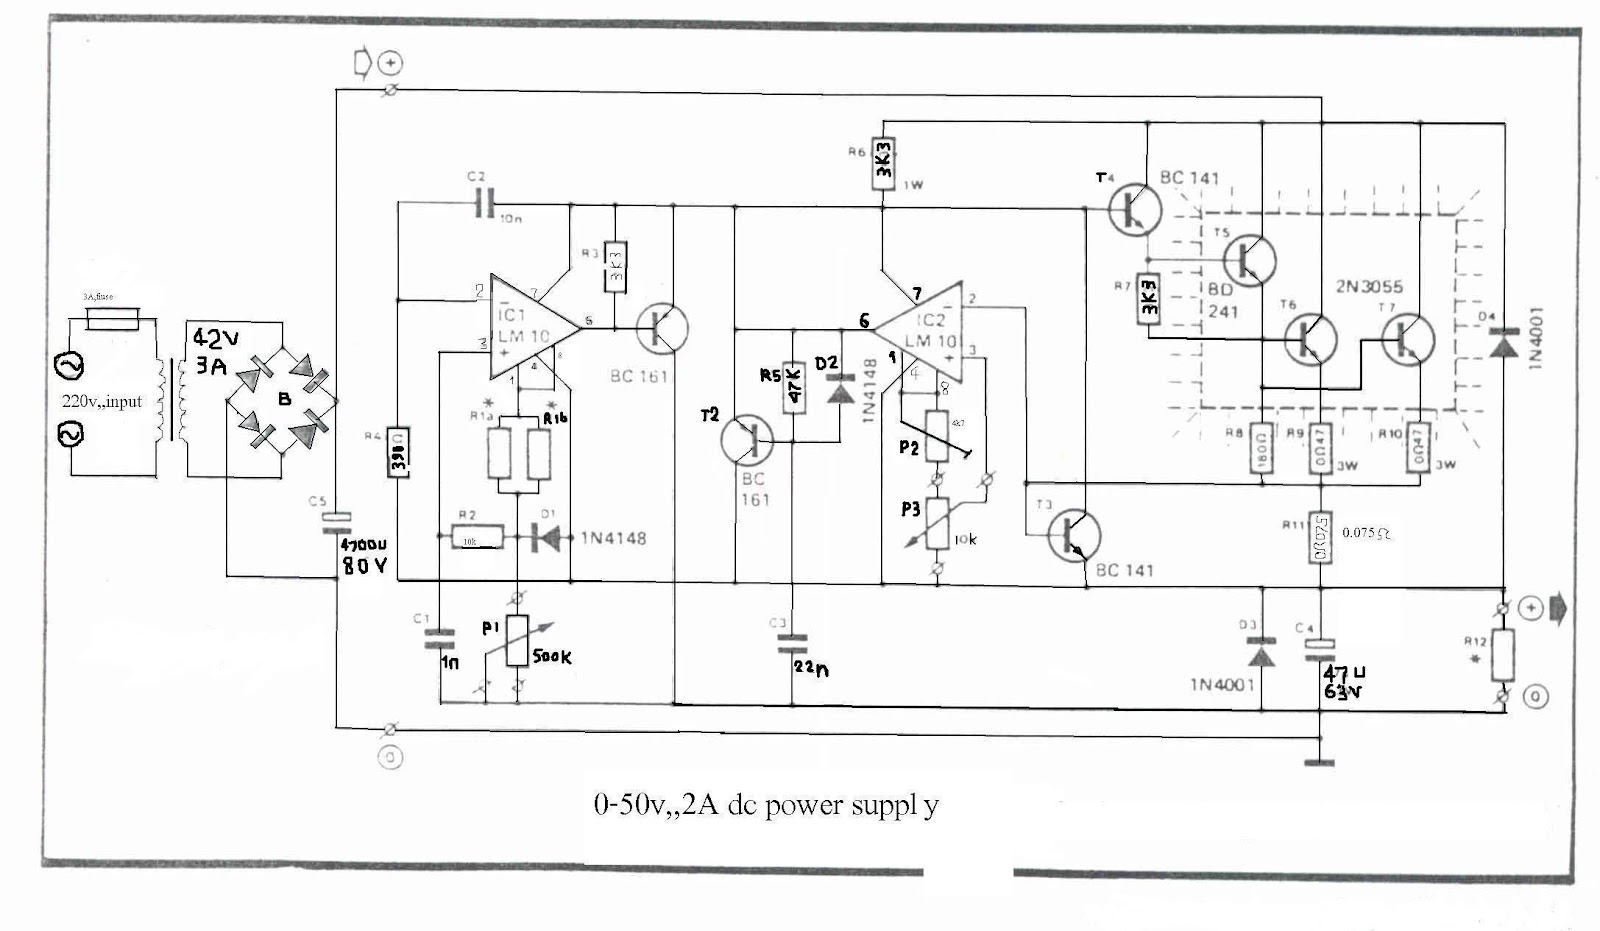 ELECTRONIC CIRCUIT PROJECT: power supply